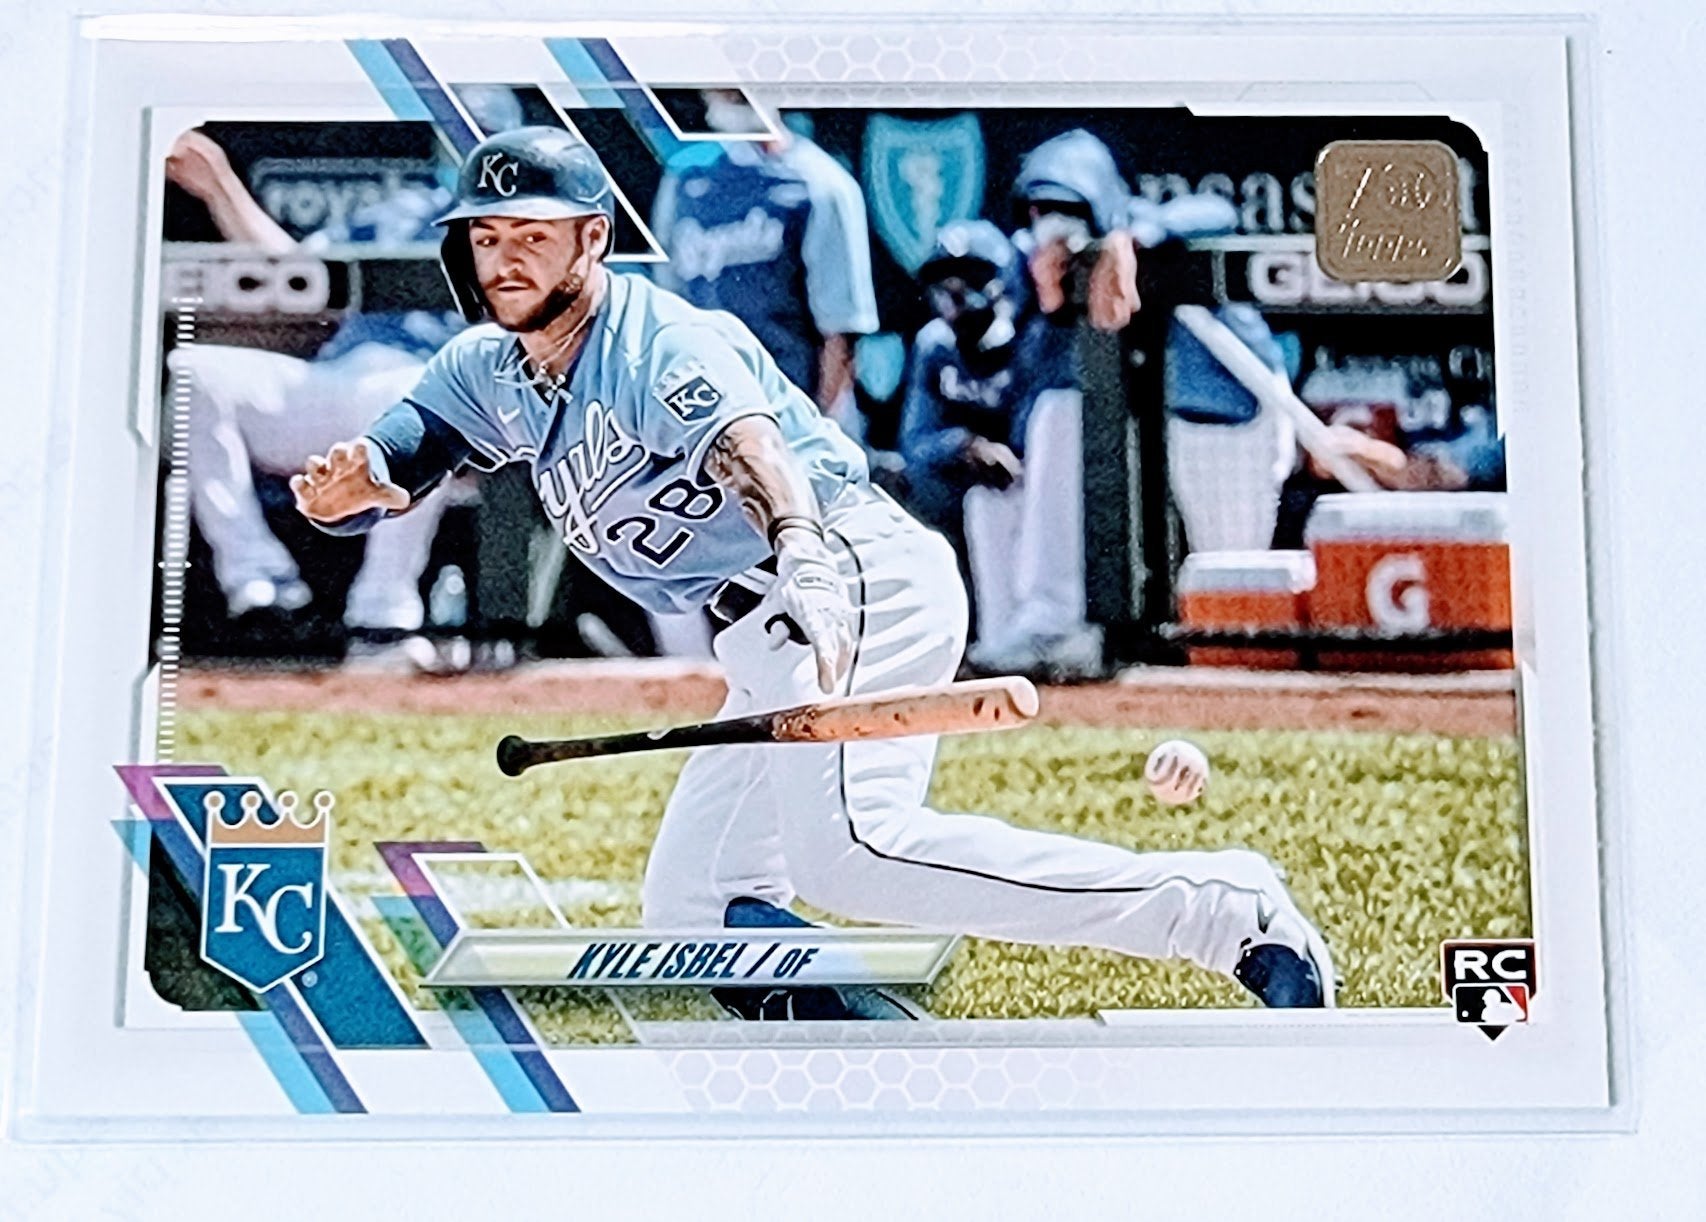 2021 Topps Update Kyle Isbel Rookie Baseball Trading Card SMCB1 simple Xclusive Collectibles   